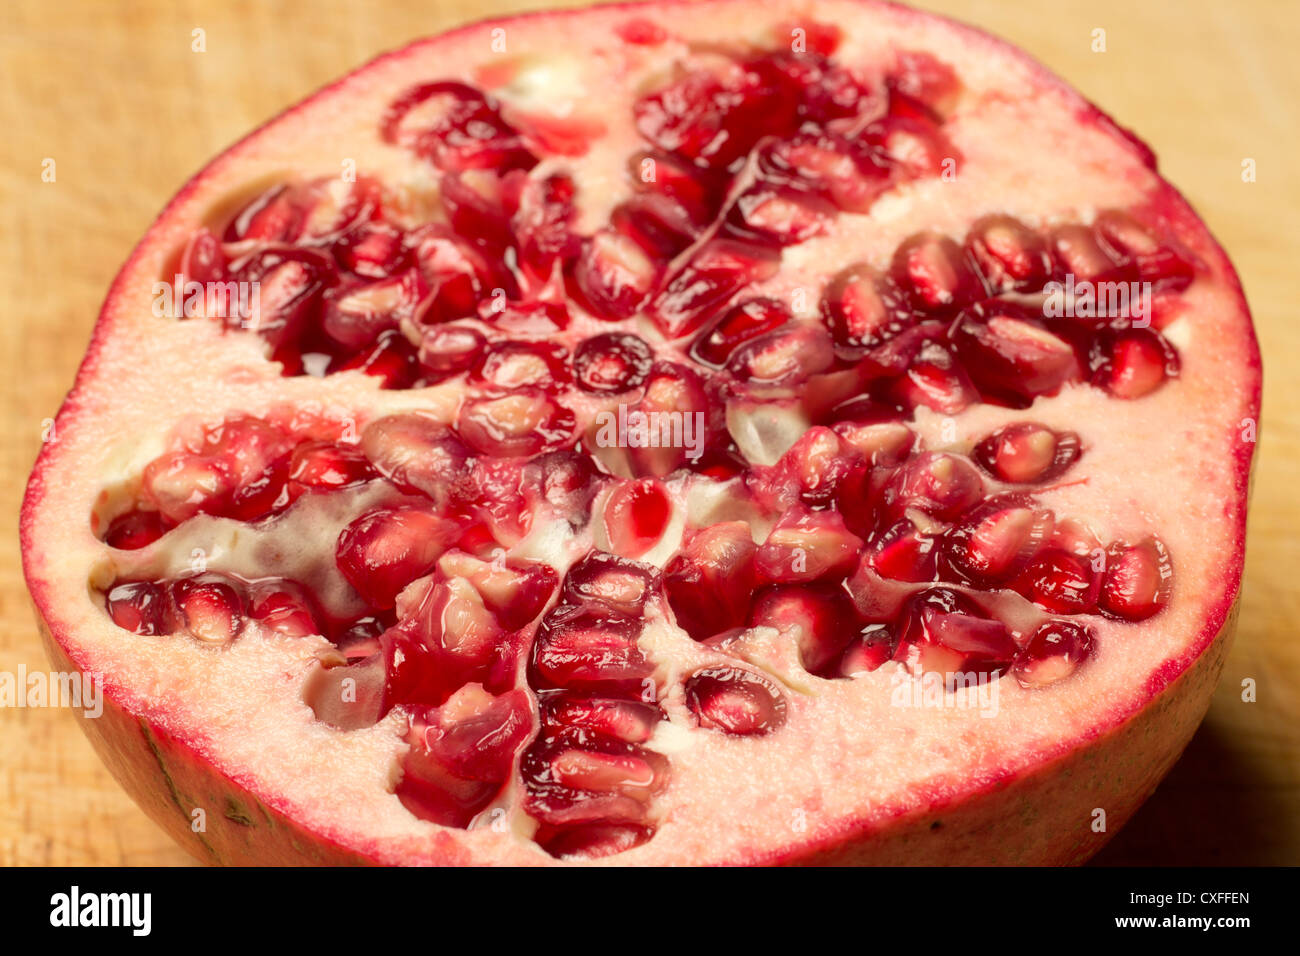 A Pomegranate sliced open to reveal the seeds. Stock Photo